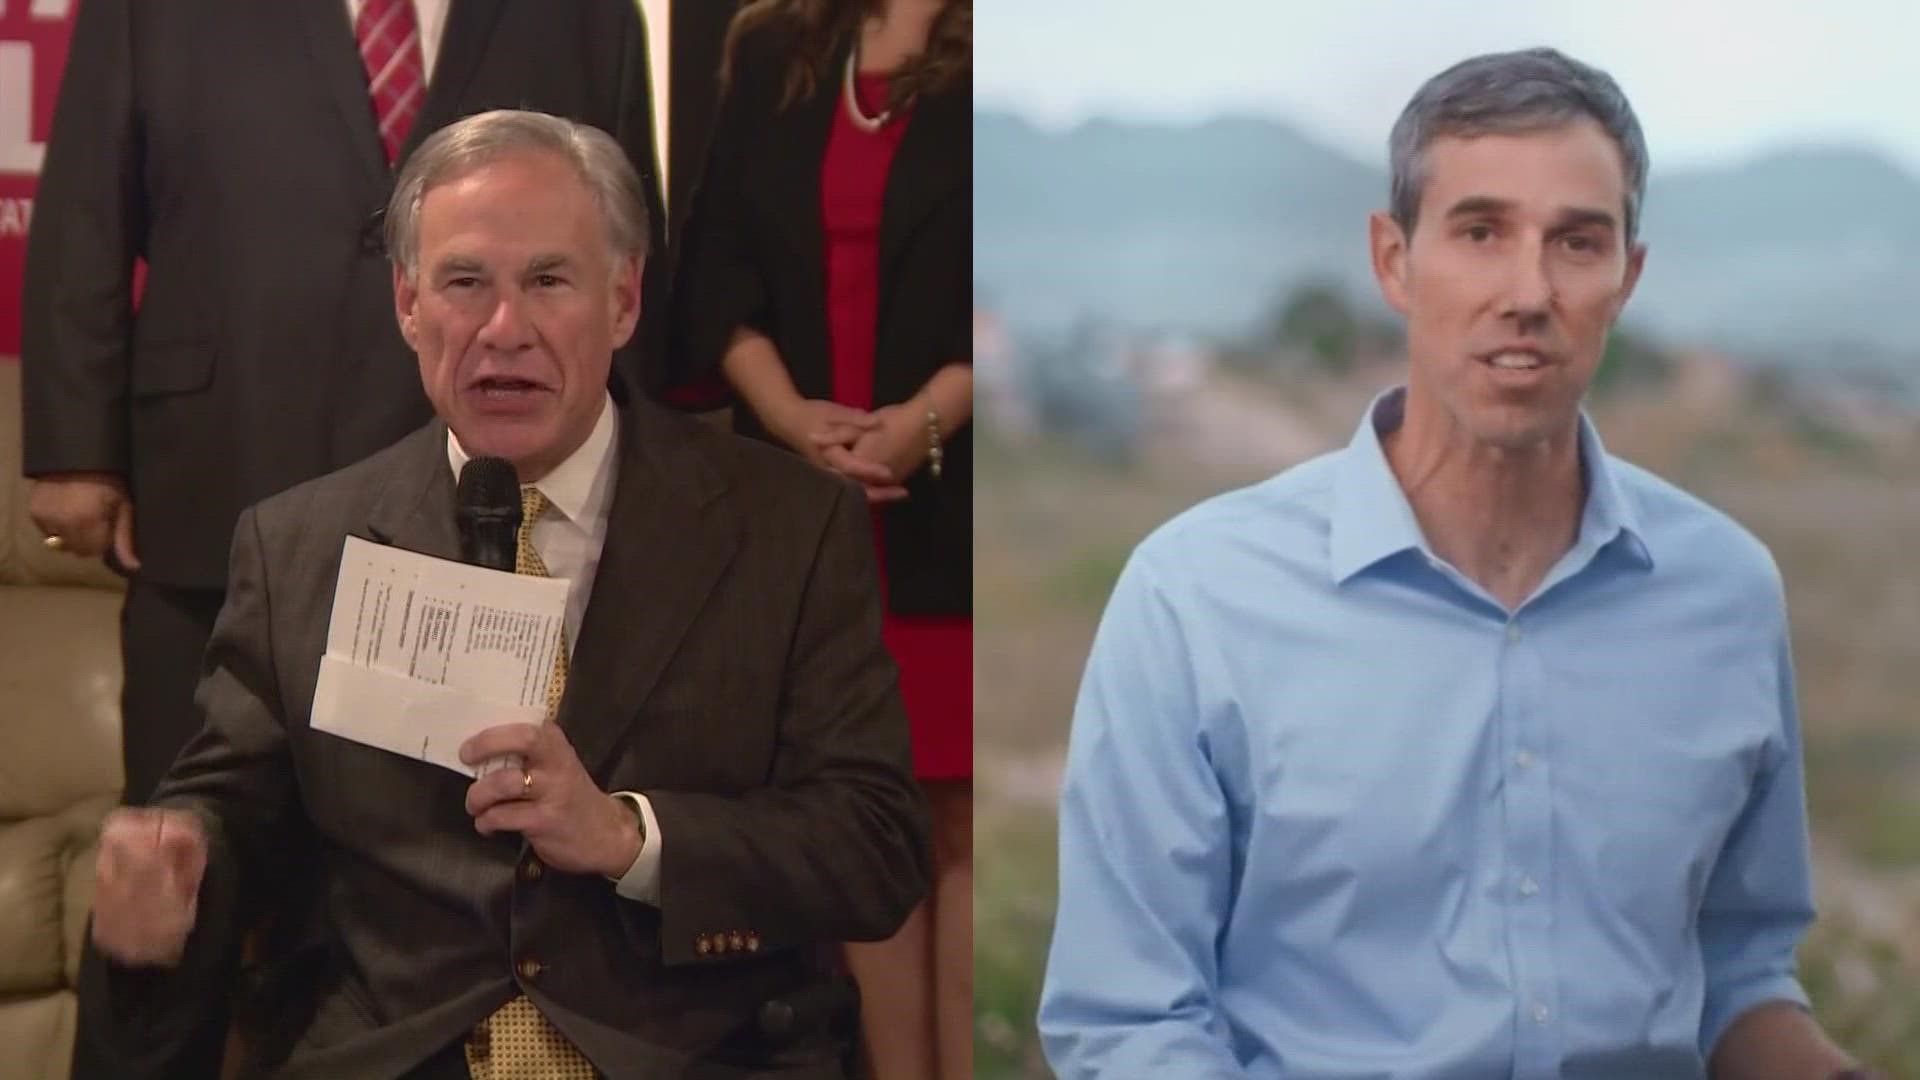 Gov. Abbott spoke about the contrast between himself and his challenger, Beto O'Rourke.